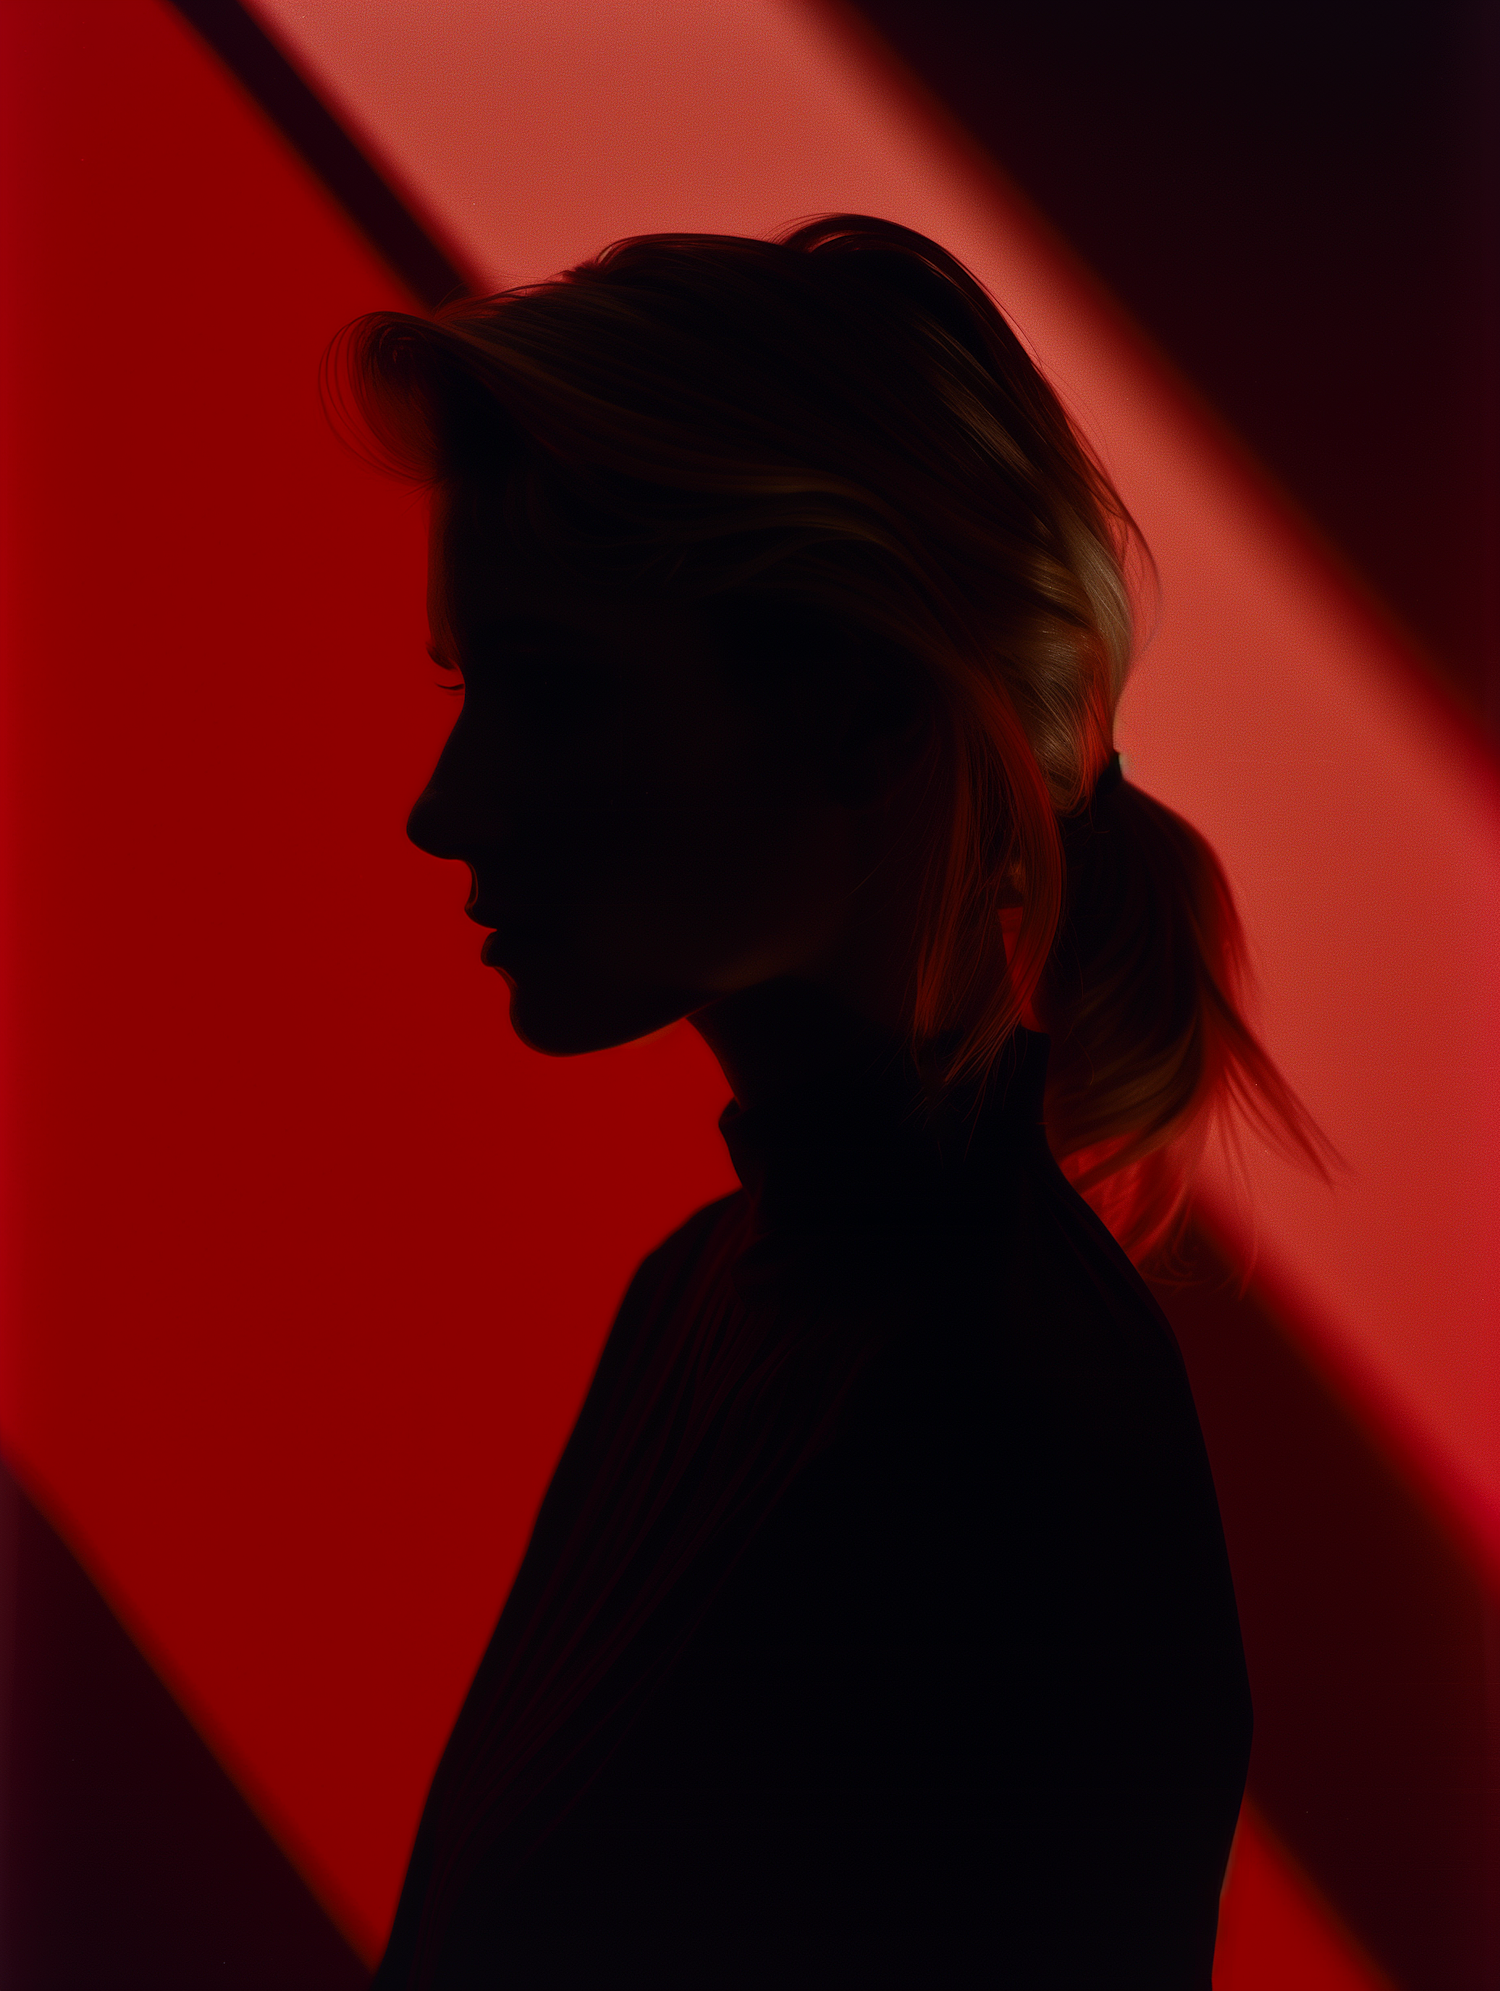 Silhouette in Red